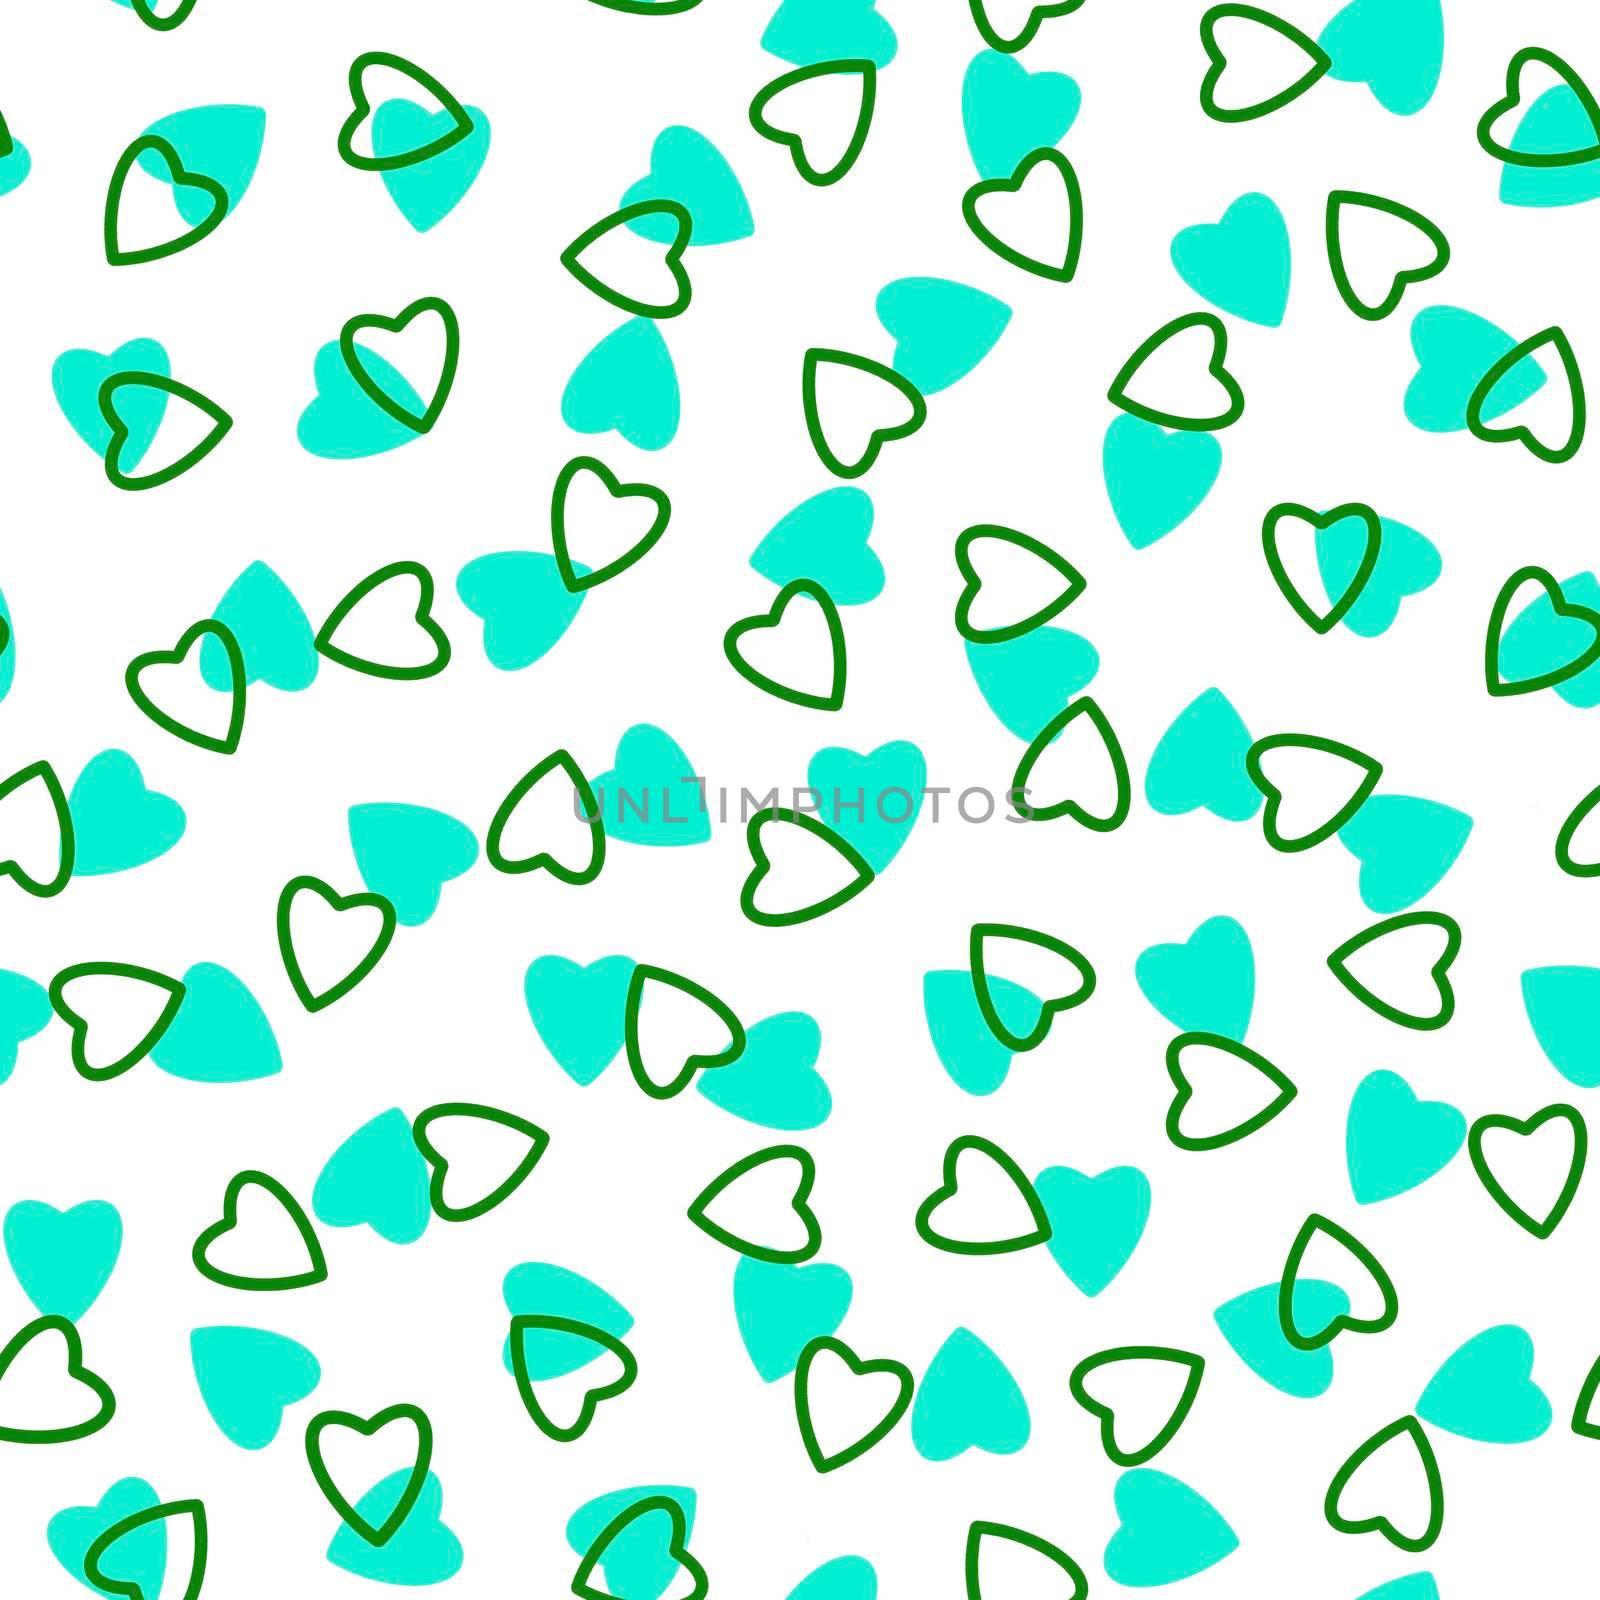 Simple heart seamless pattern,endless chaotic texture made of tiny heart silhouettes.Valentines,mothers day background.Azure,green,white.Great for Easter,wedding,scrapbook,gift wrapping paper,textiles